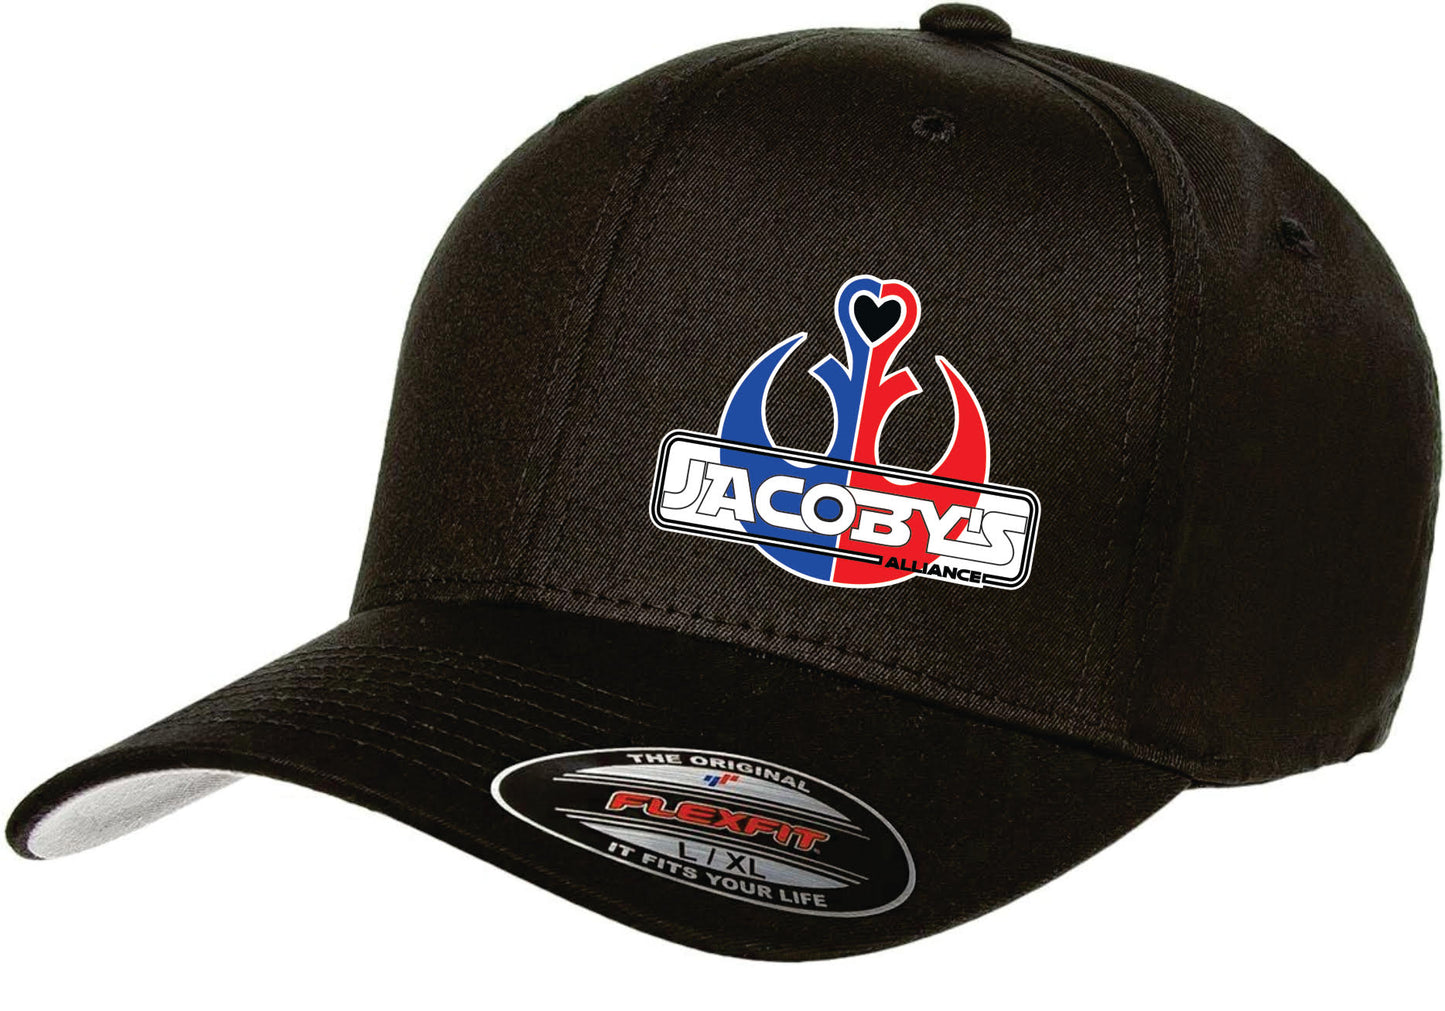 Jacoby's Alliance Hat